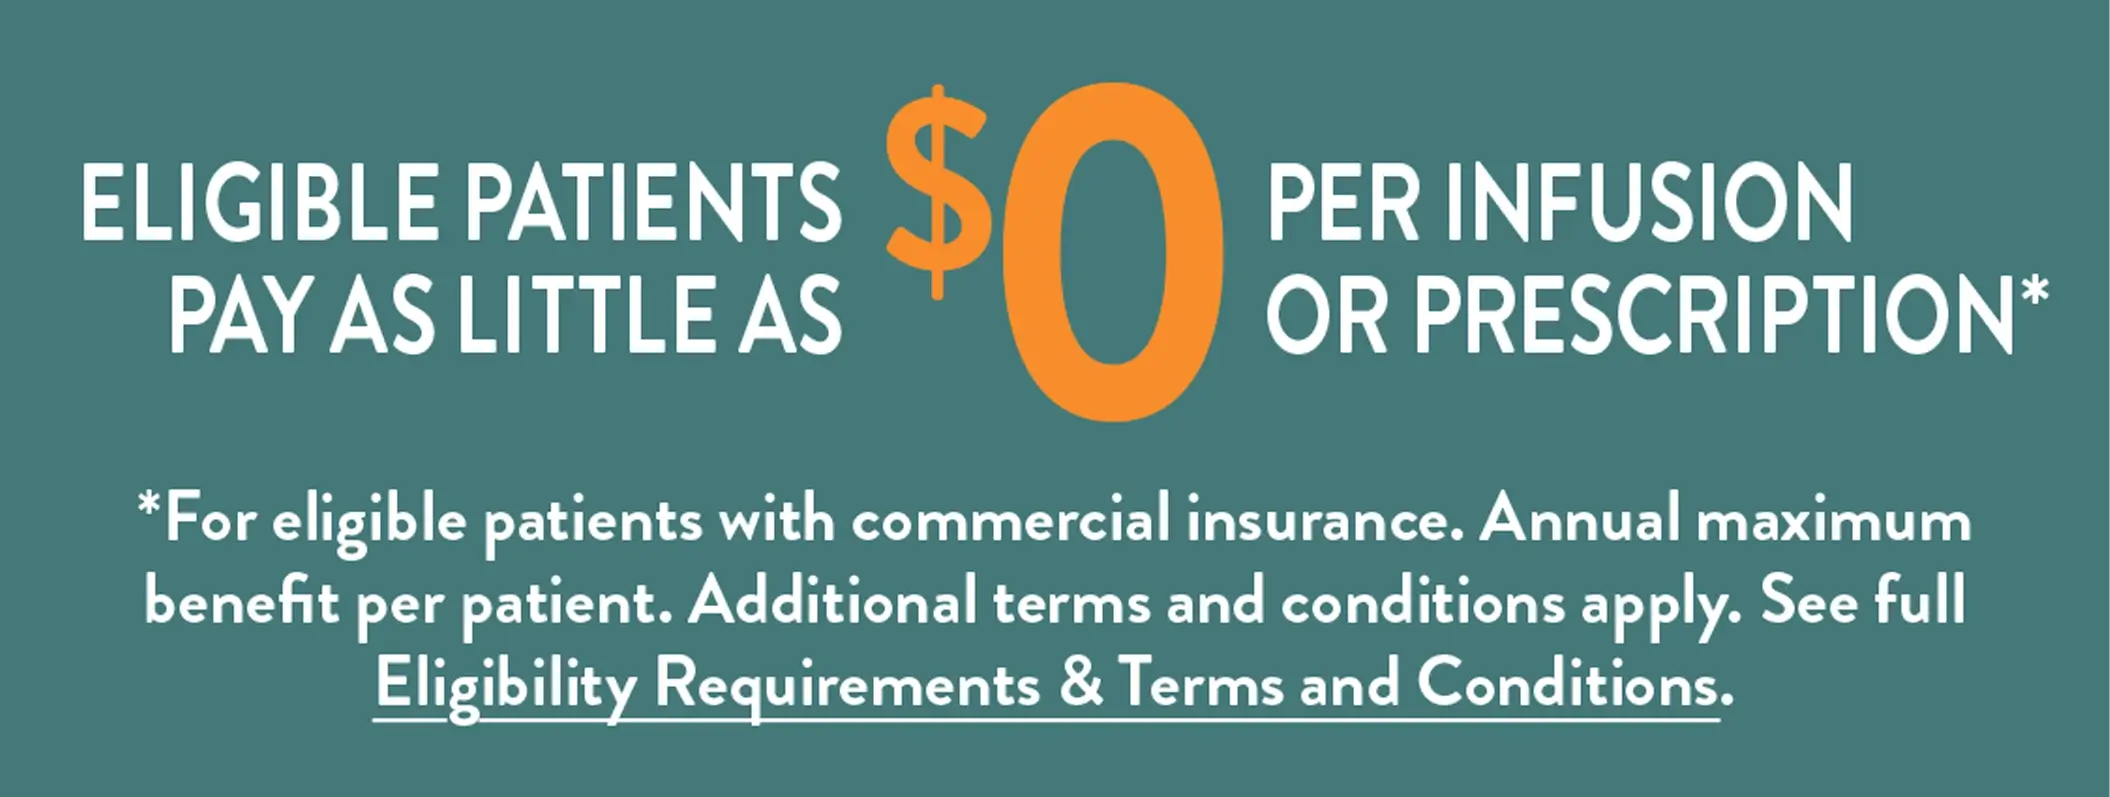 Eligible patients with commercial insurance may pay as little as $0 per infusion or prescription, with restrictions